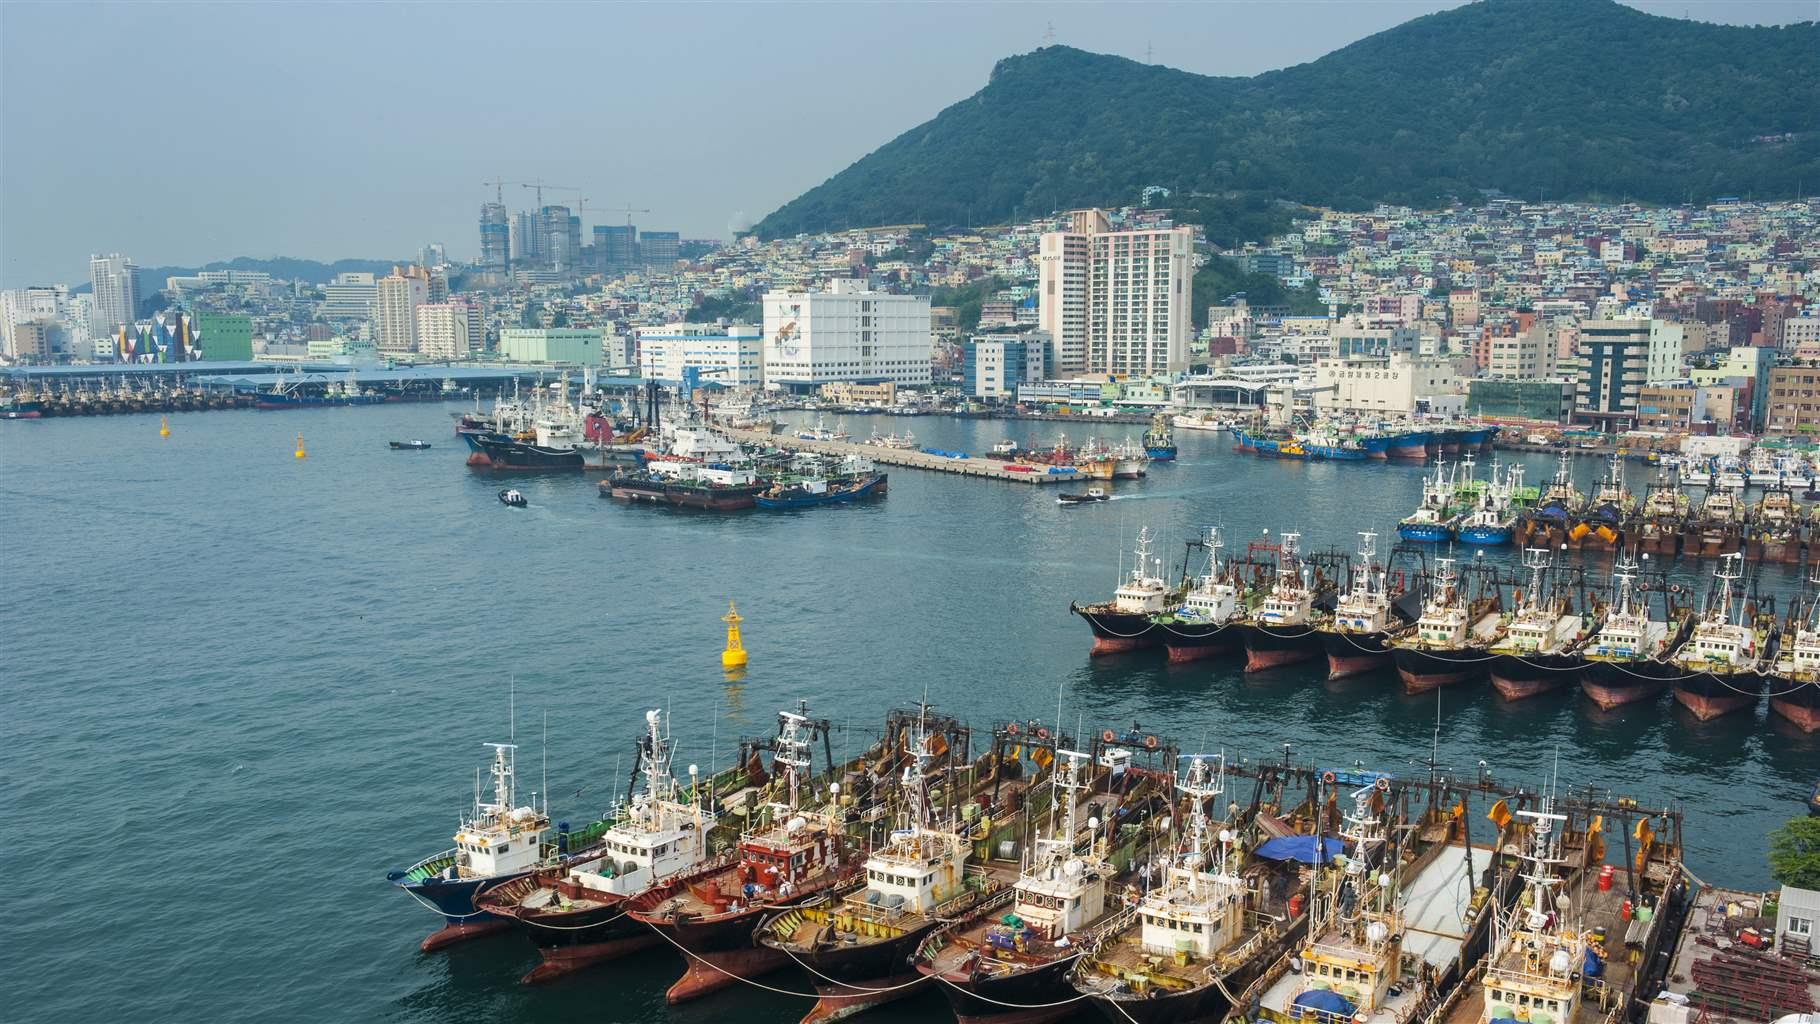  Busan, officially Busan Metropolitan City, Romanized as Pusan before 2000, is South Koreas second largest city after Seoul, with a population of approximately 3.6 million.